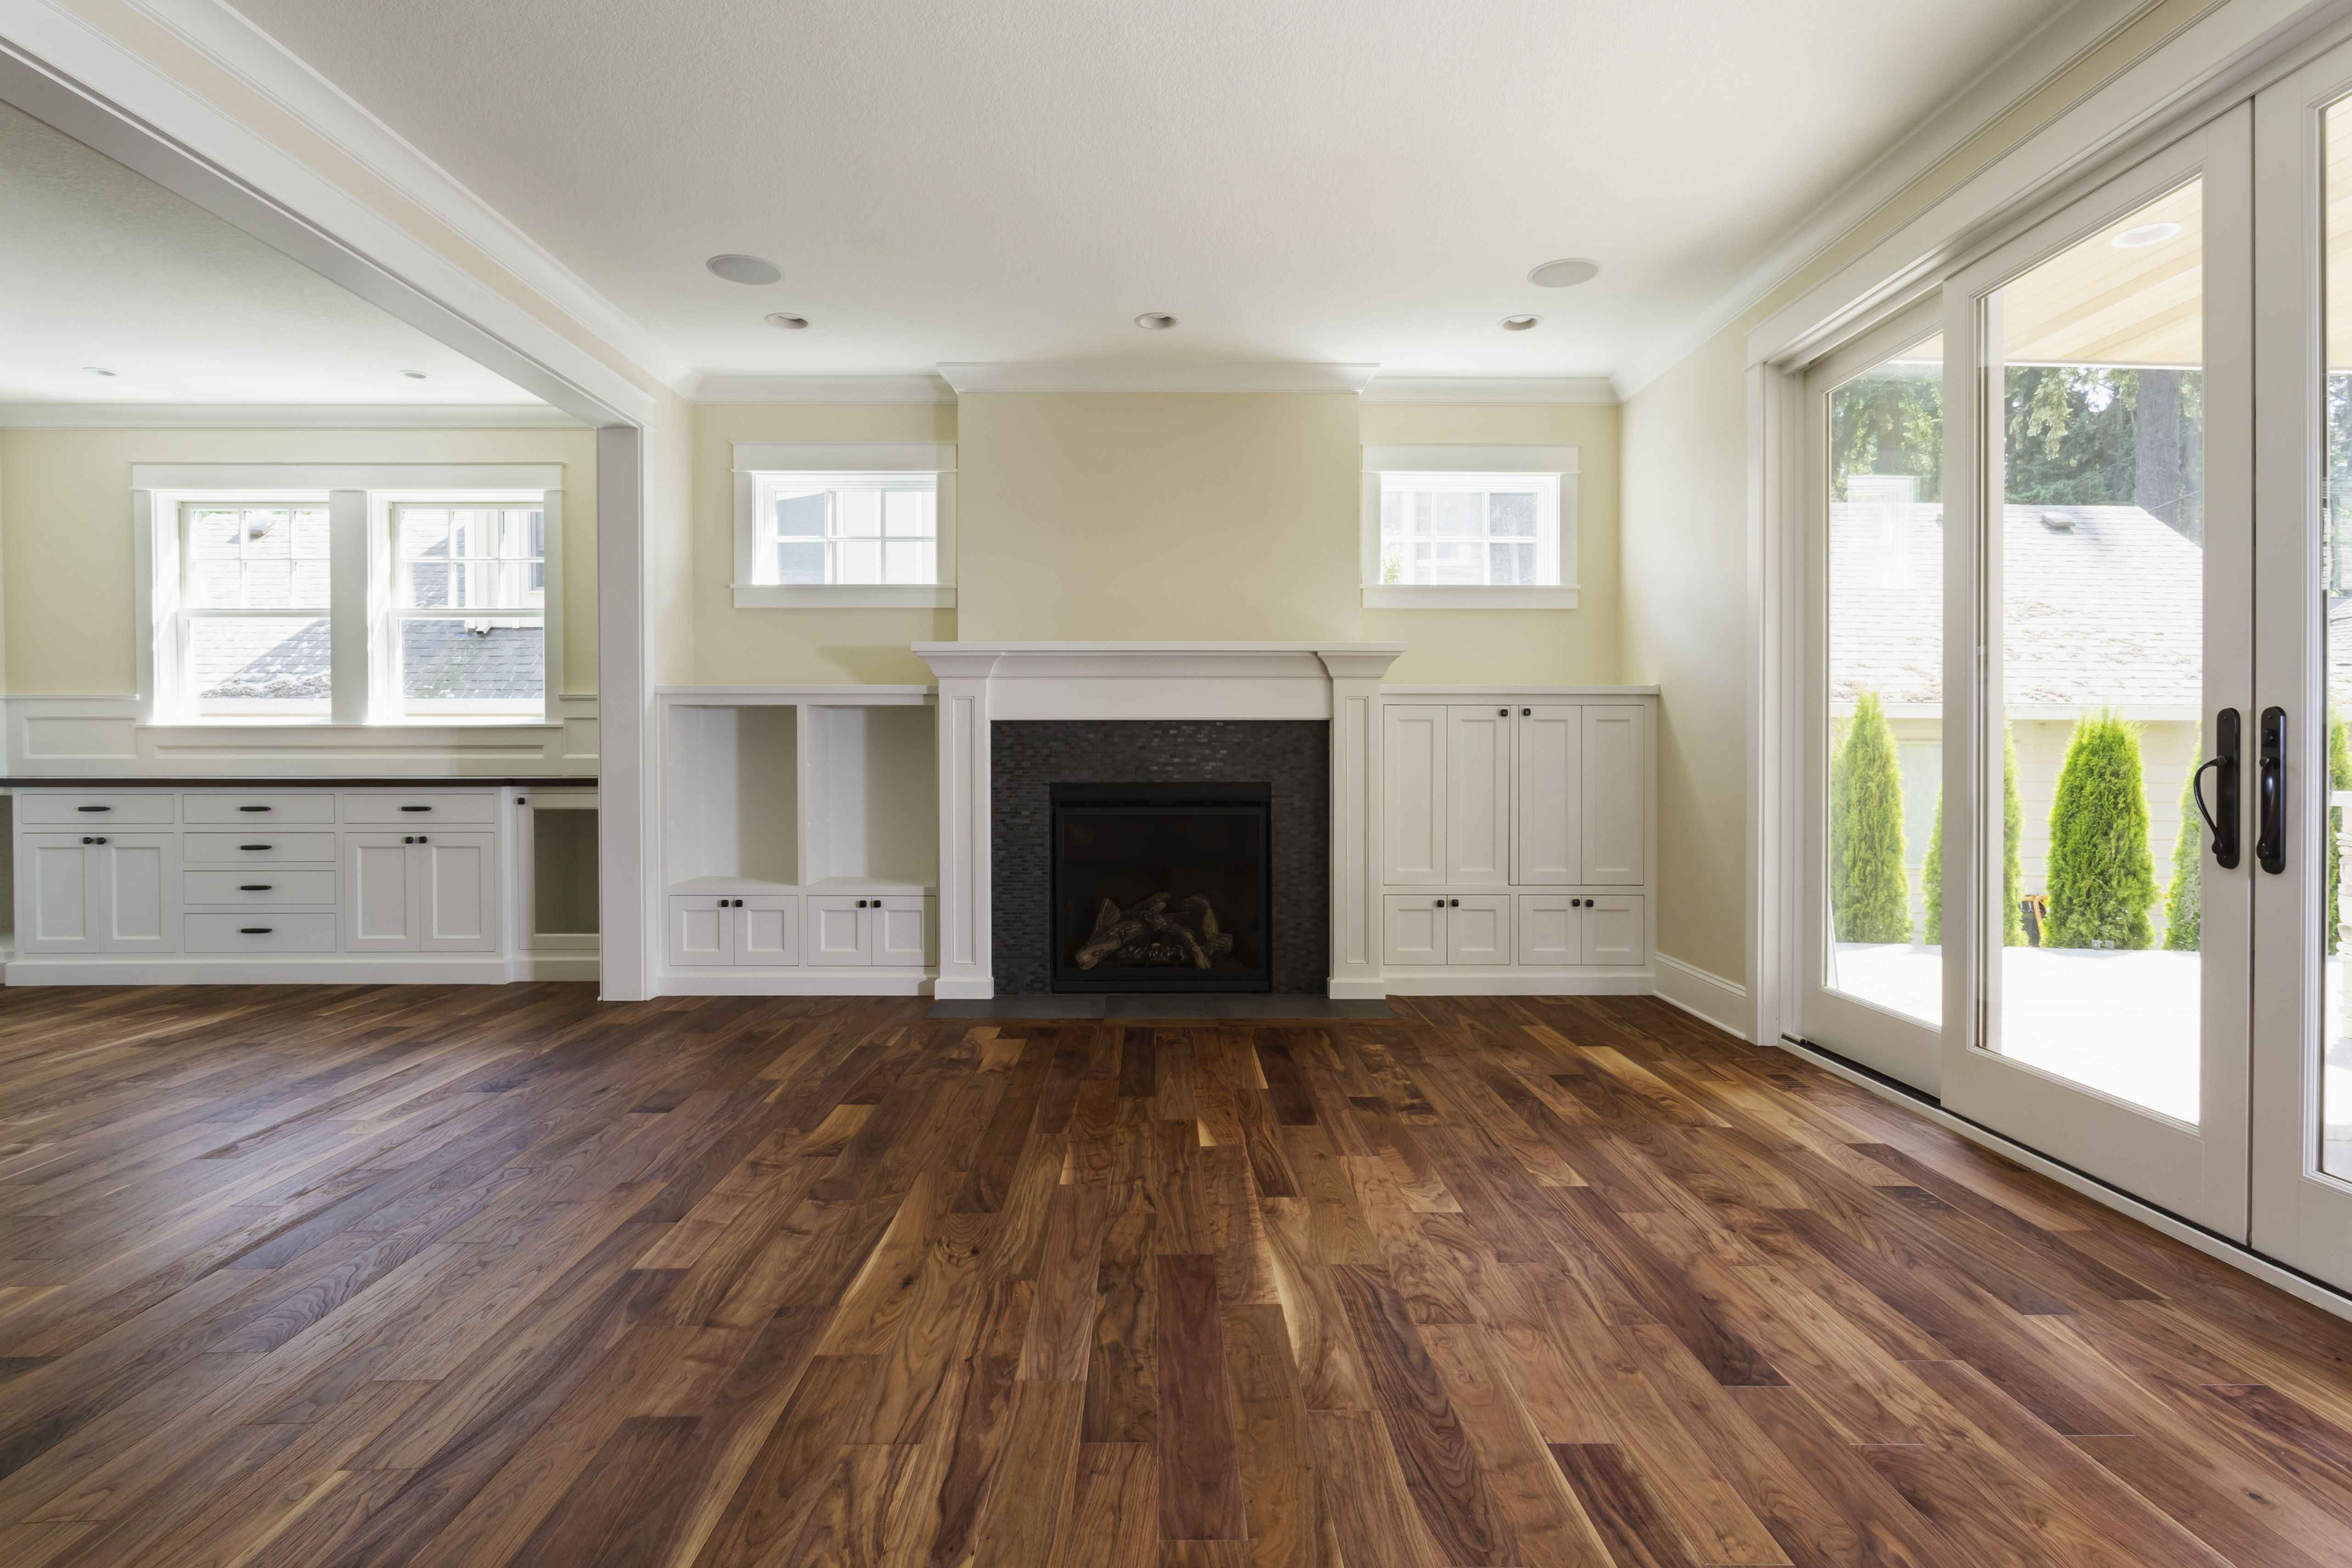 hardwood floor ideas styles of the pros and cons of prefinished hardwood flooring inside fireplace and built in shelves in living room 57bef8e33df78cc16e